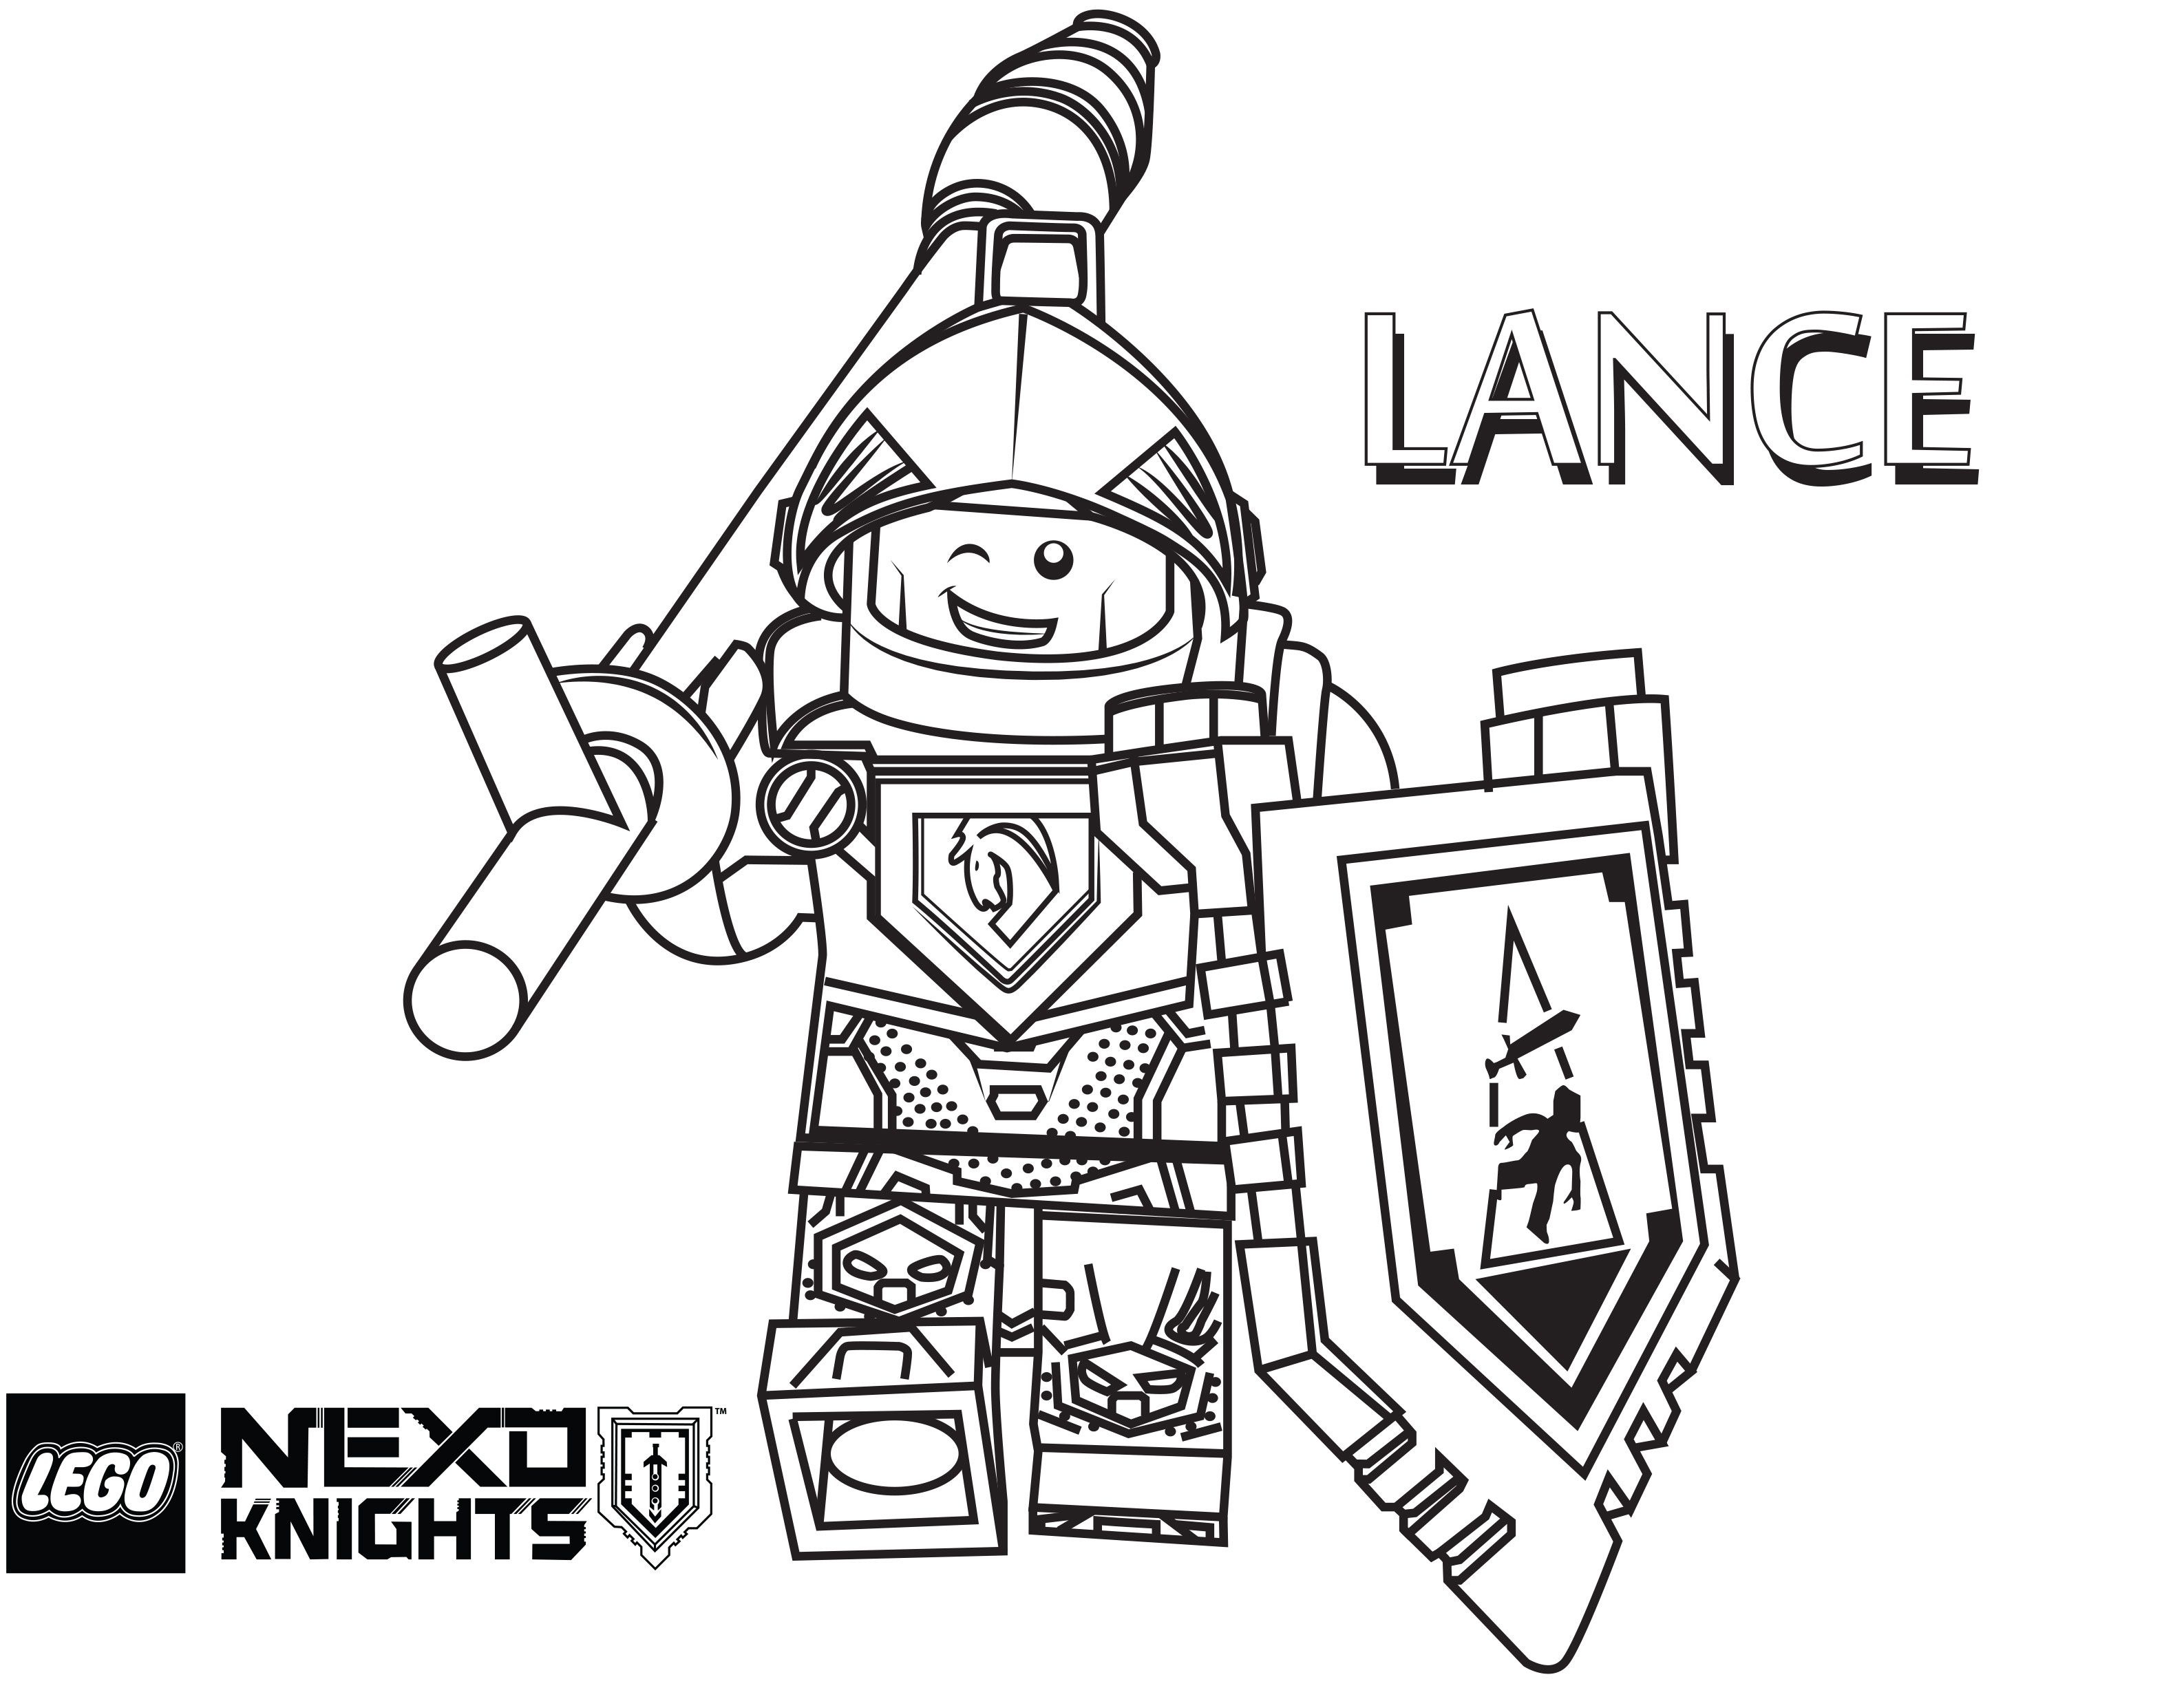 Lego Nexo Knights Coloring Pages : Free Printable Lego Nexo Knights - Free Printable Pictures Of Knights